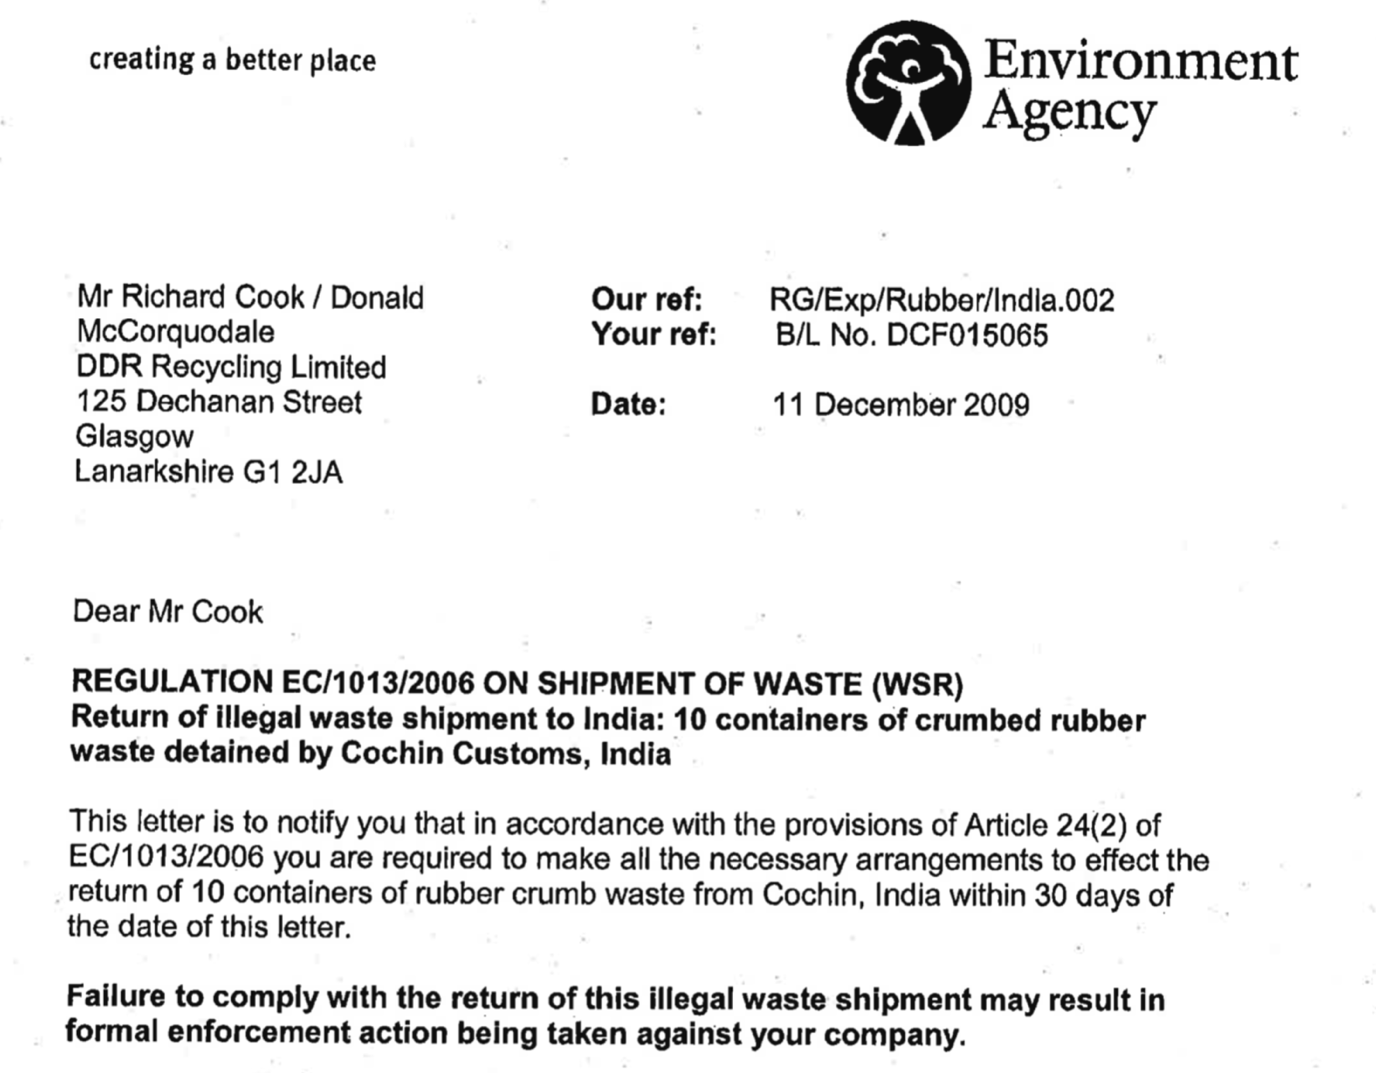 Environment Agency Letter to Richard Cook